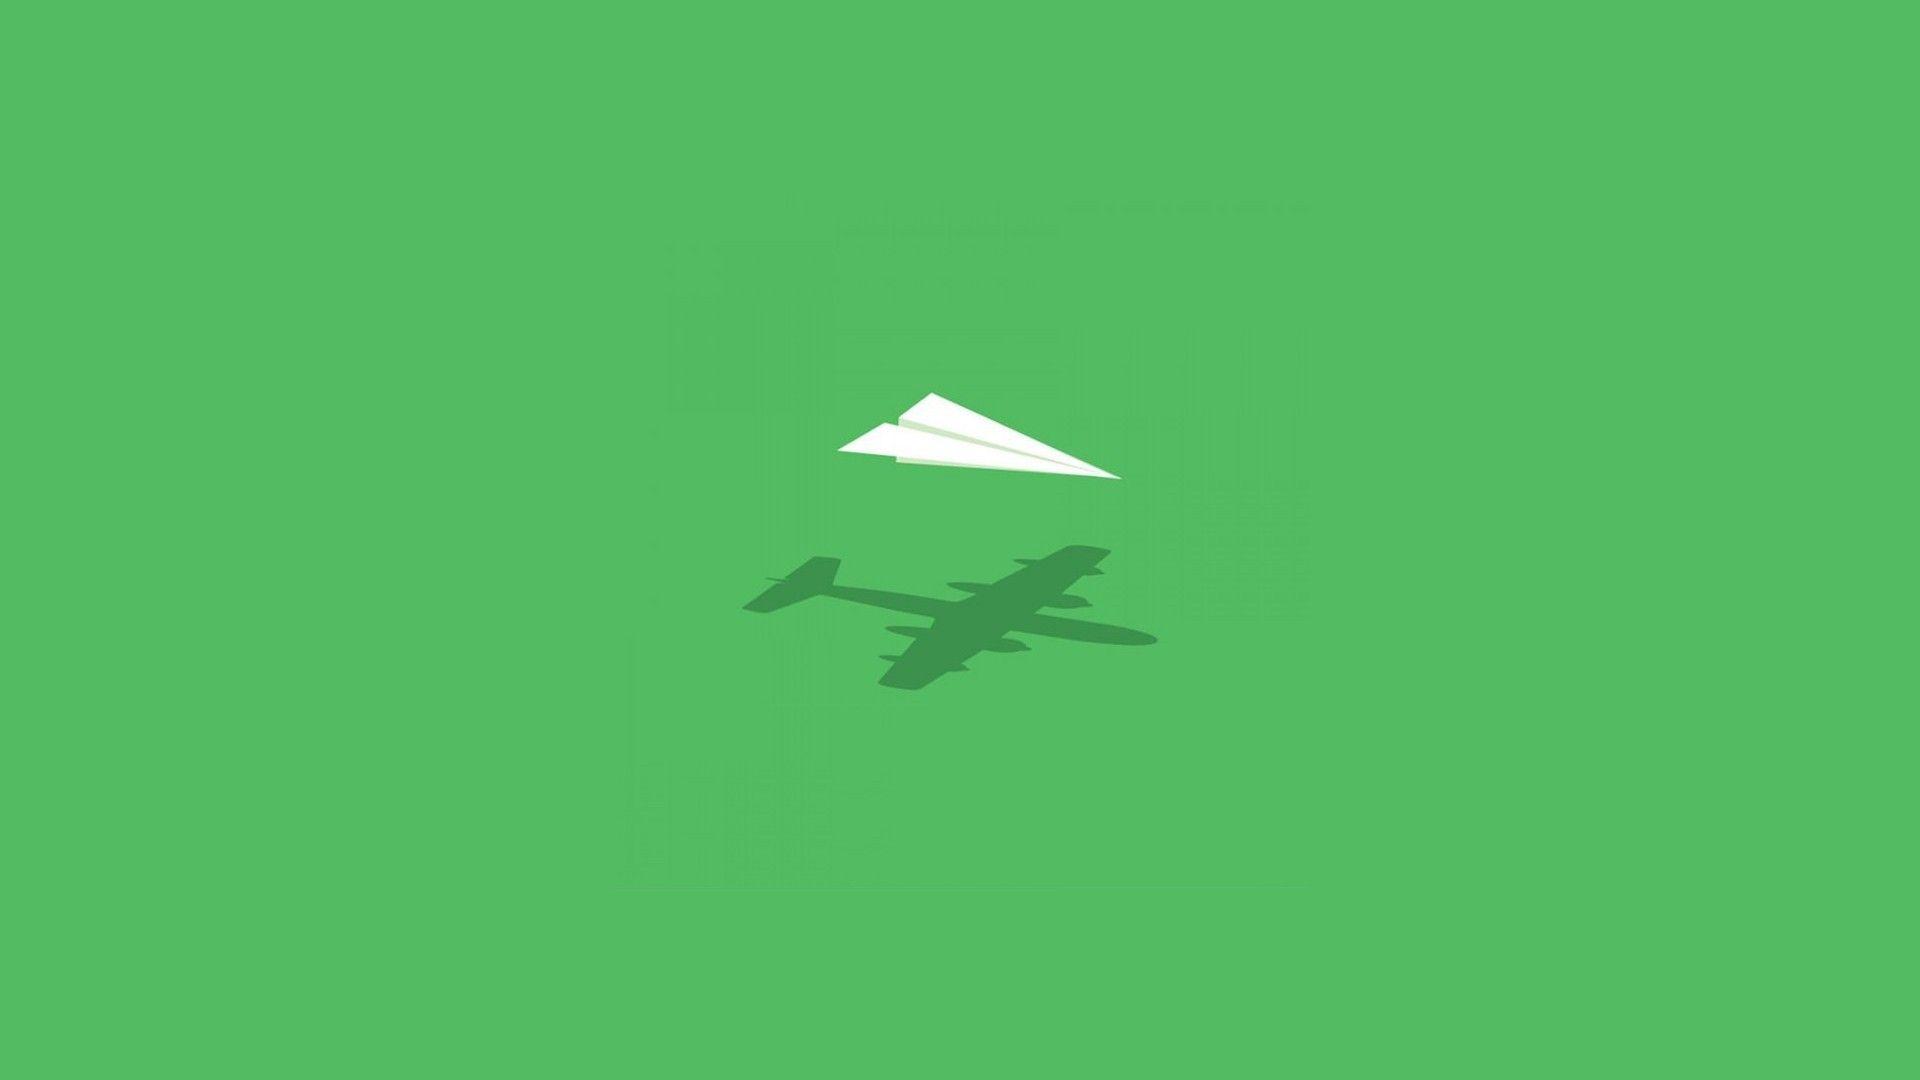 Green Airplane Logo - Wallpaper : illustration, simple background, abstract, airplane